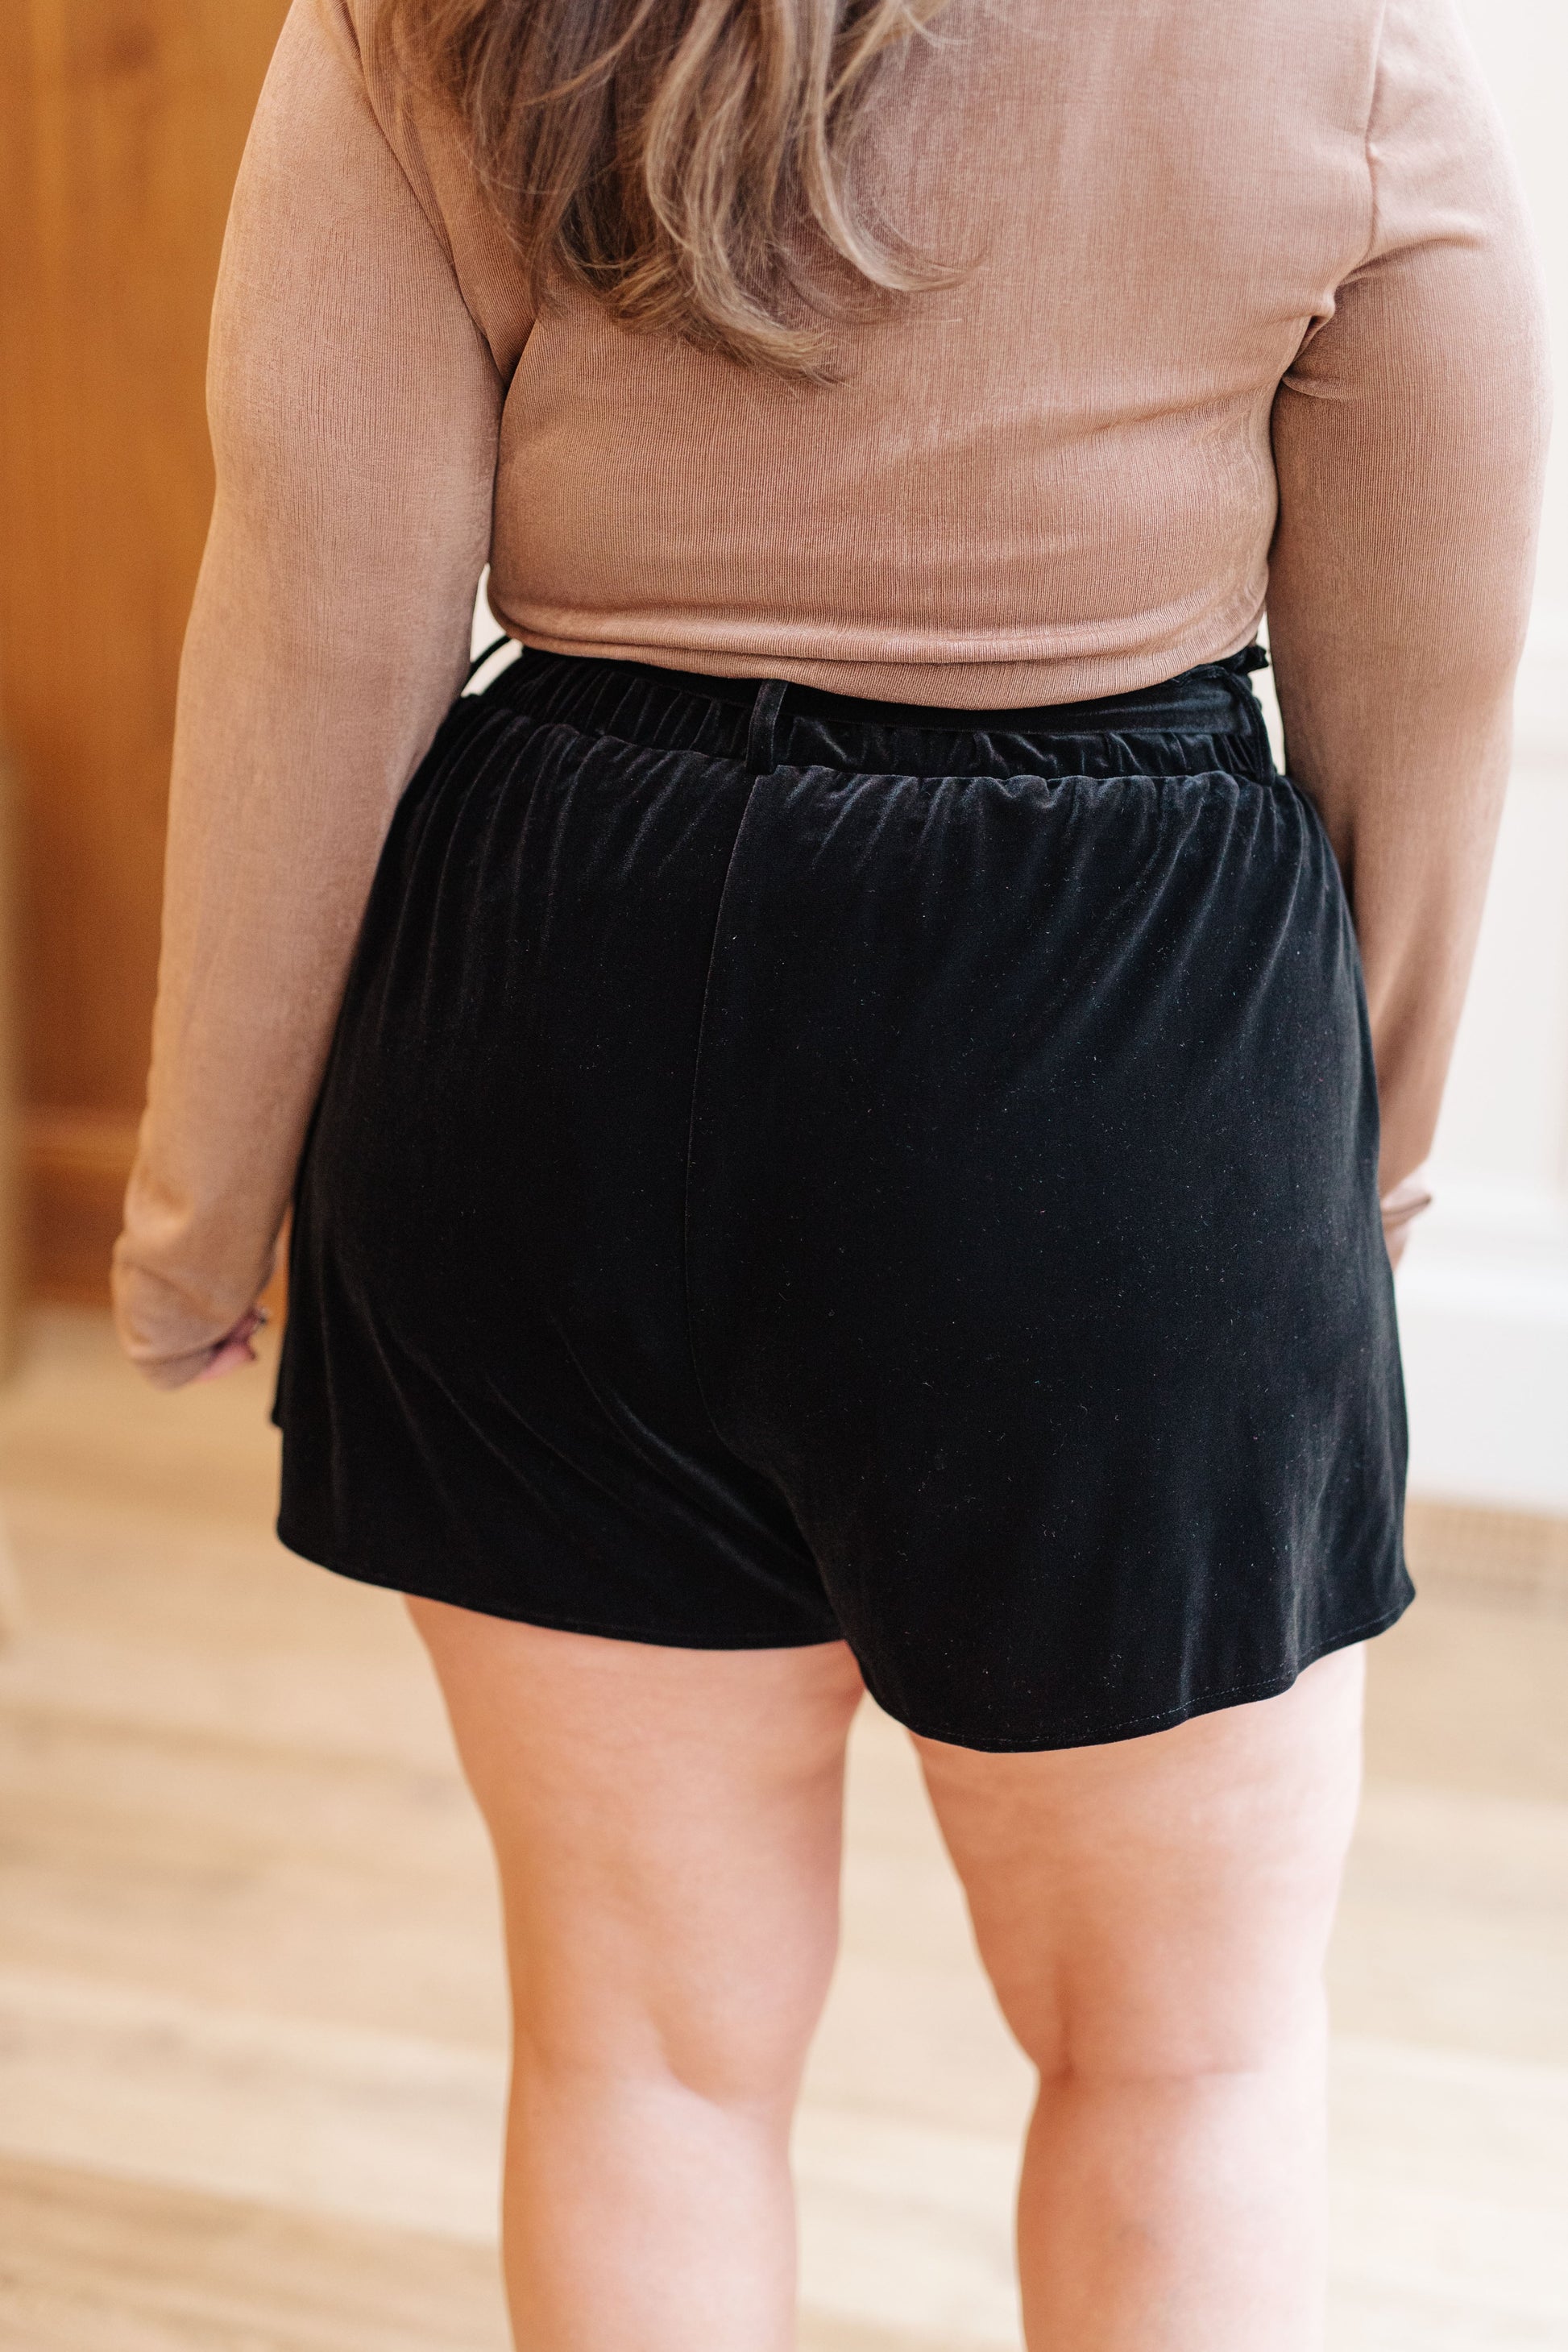 Fall in love with our luxurious Wrapped in Velvet Shorts! Featuring a high rise, these silky black velvet shorts have a gathered elastic paper bag waistband and self tie belt for an adjustable fit. Stylish pockets add the perfect touch. Feel confident and beautiful in these oh-so-comfy shorts! S - 3X